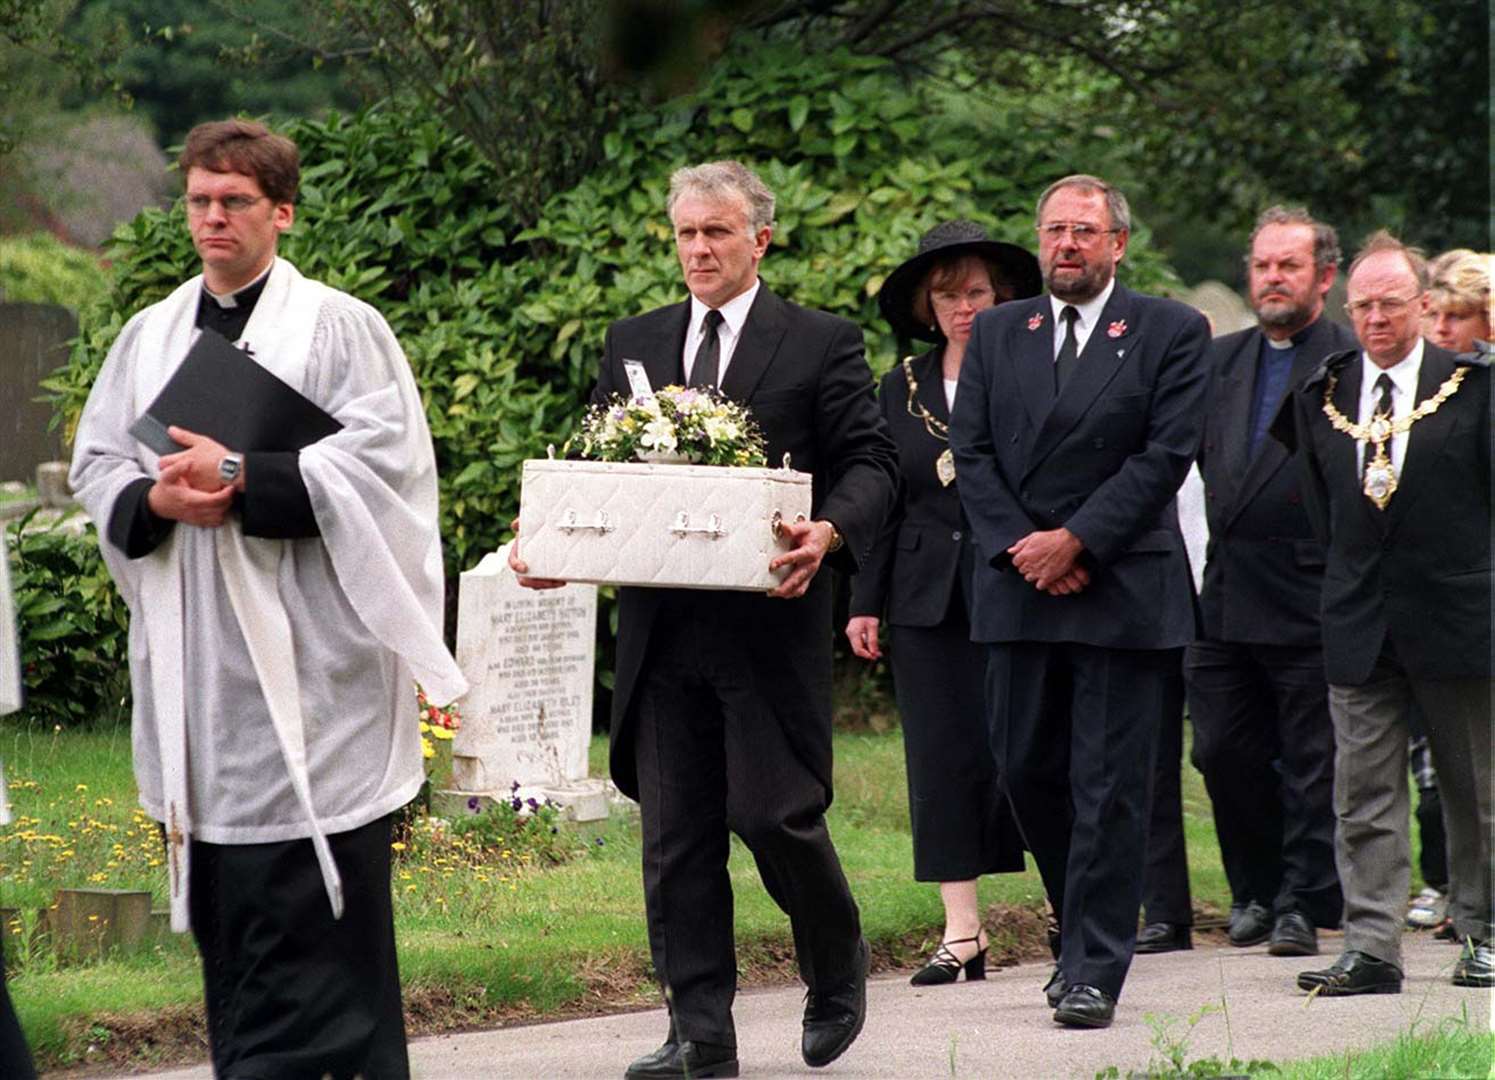 Baby Callum’s funeral was arranged by the residents of Warrington (Richard Williams/Liverpool Daily Post/PA)